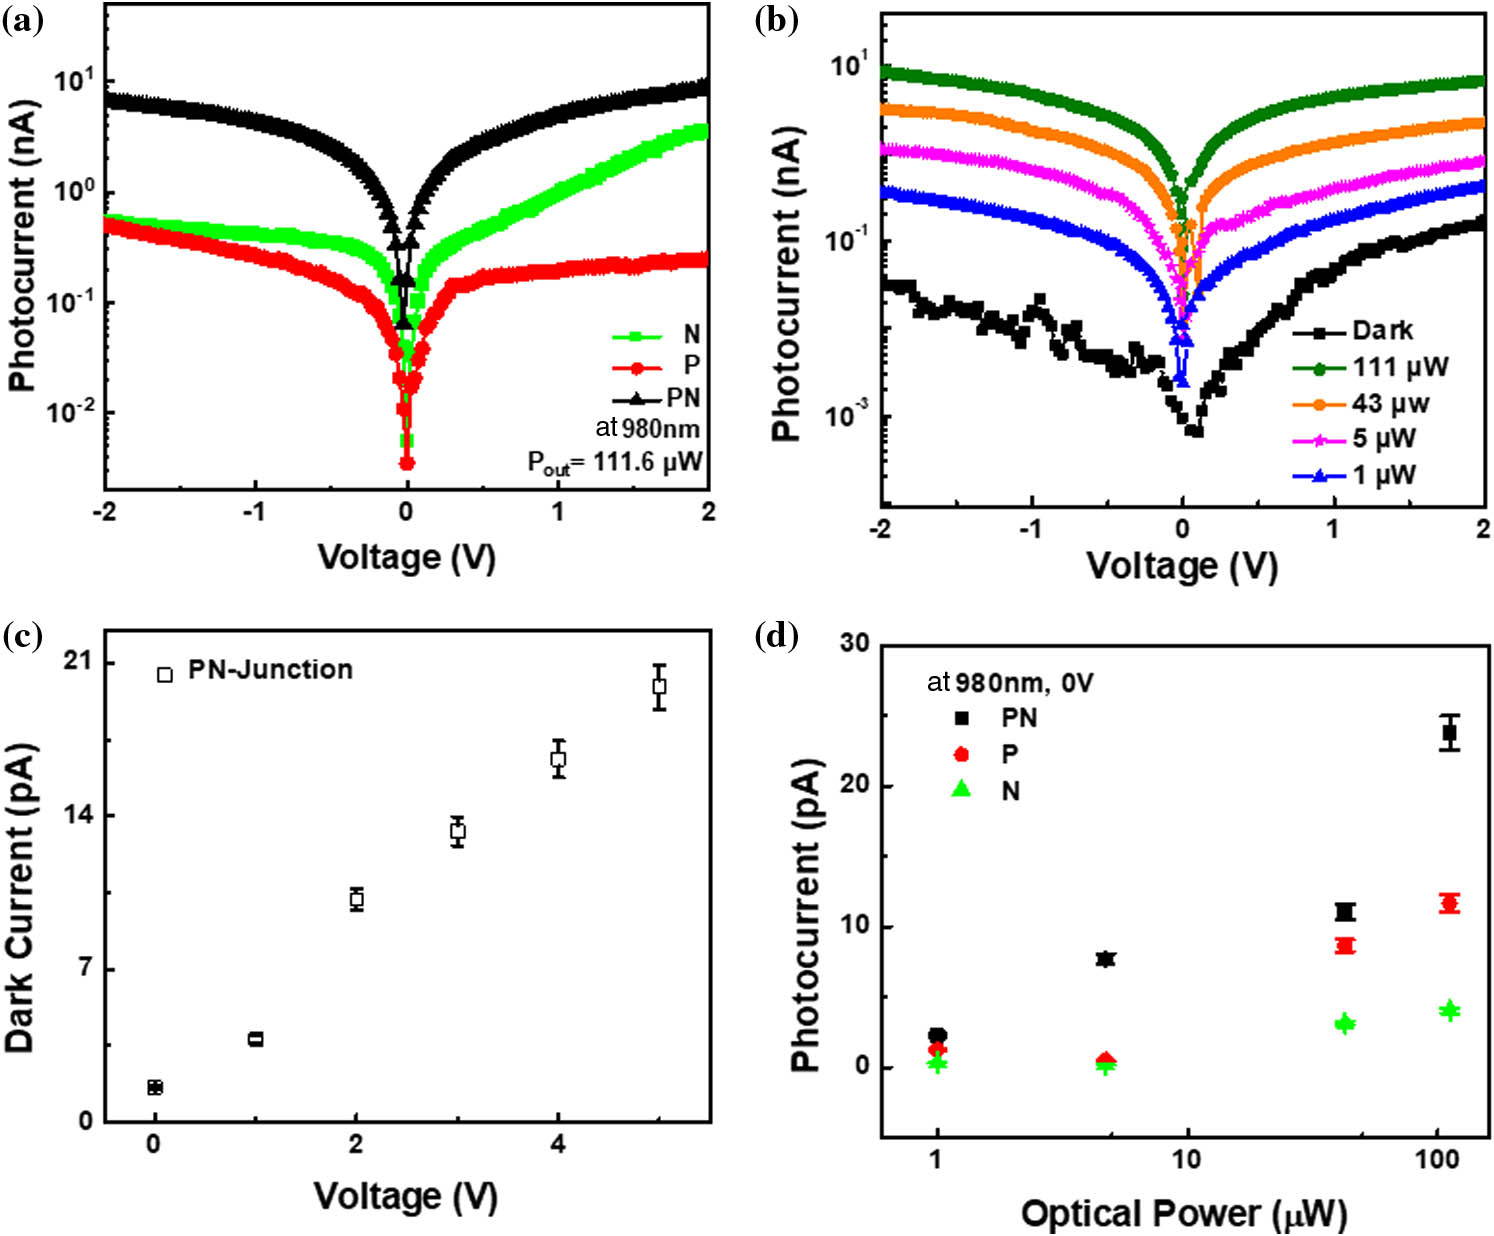 Photovoltaic characteristics of p-n-InSe heterojunction. (a) Typical I–V characteristics of p (red), n (green), and p-n junction (black) 2D InSe photodetectors. (b) The I–V characteristics of the p-n-InSe heterojunction under different optical input power show saturation of photocurrent at higher optical power. (c) Dark current mapping under bias voltage for p-n junction device indicates picoamps range current. This exhibits a noise equivalent power (NEP) of ∼2 nW/Hz0.5 at zero bias. (d) The corresponding fitting curves for the relationship between the photocurrents and the optical power of the p-InSe/n-InSe heterojunction under zero biased voltage and 980 nm light condition.